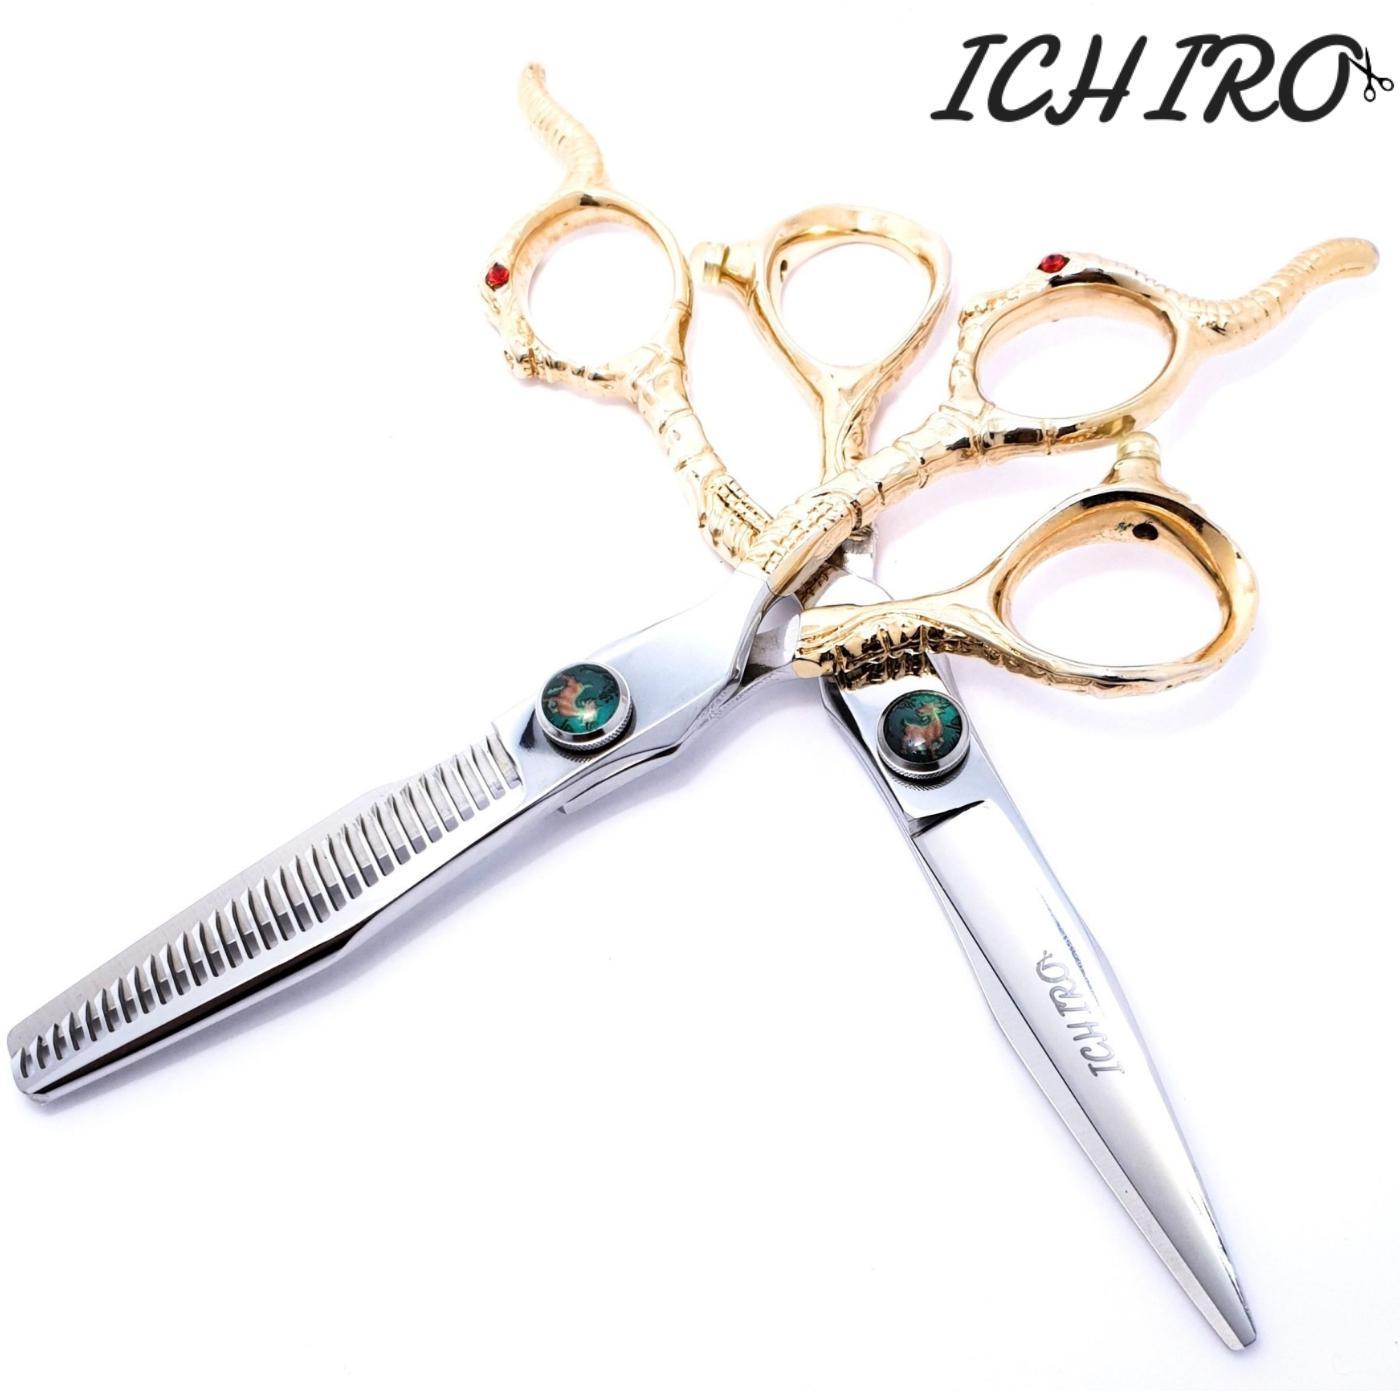 Ichiro Dragon Hair Shears: Cutting and Thinning Scissors, and Hair Combs for Styling.